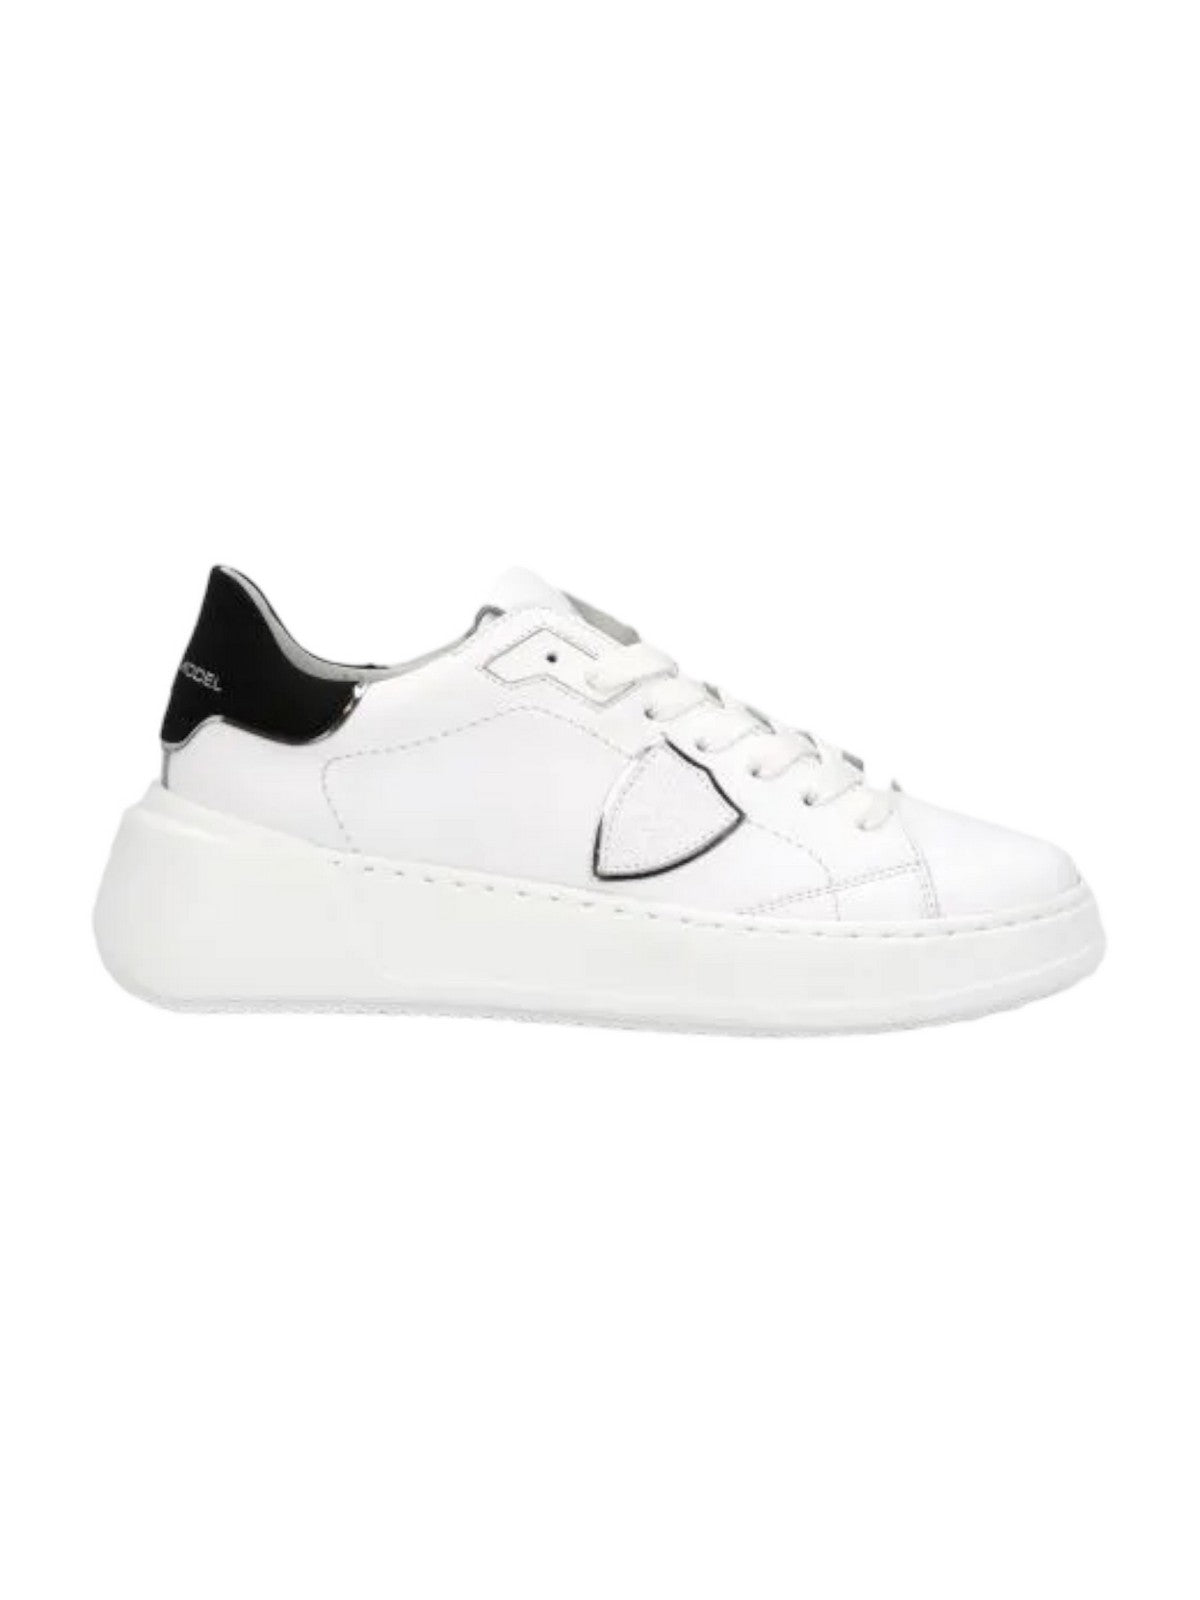 PHILIPPE MODEL Sneaker Donna Tres temple low woman BJLD V010 Bianco